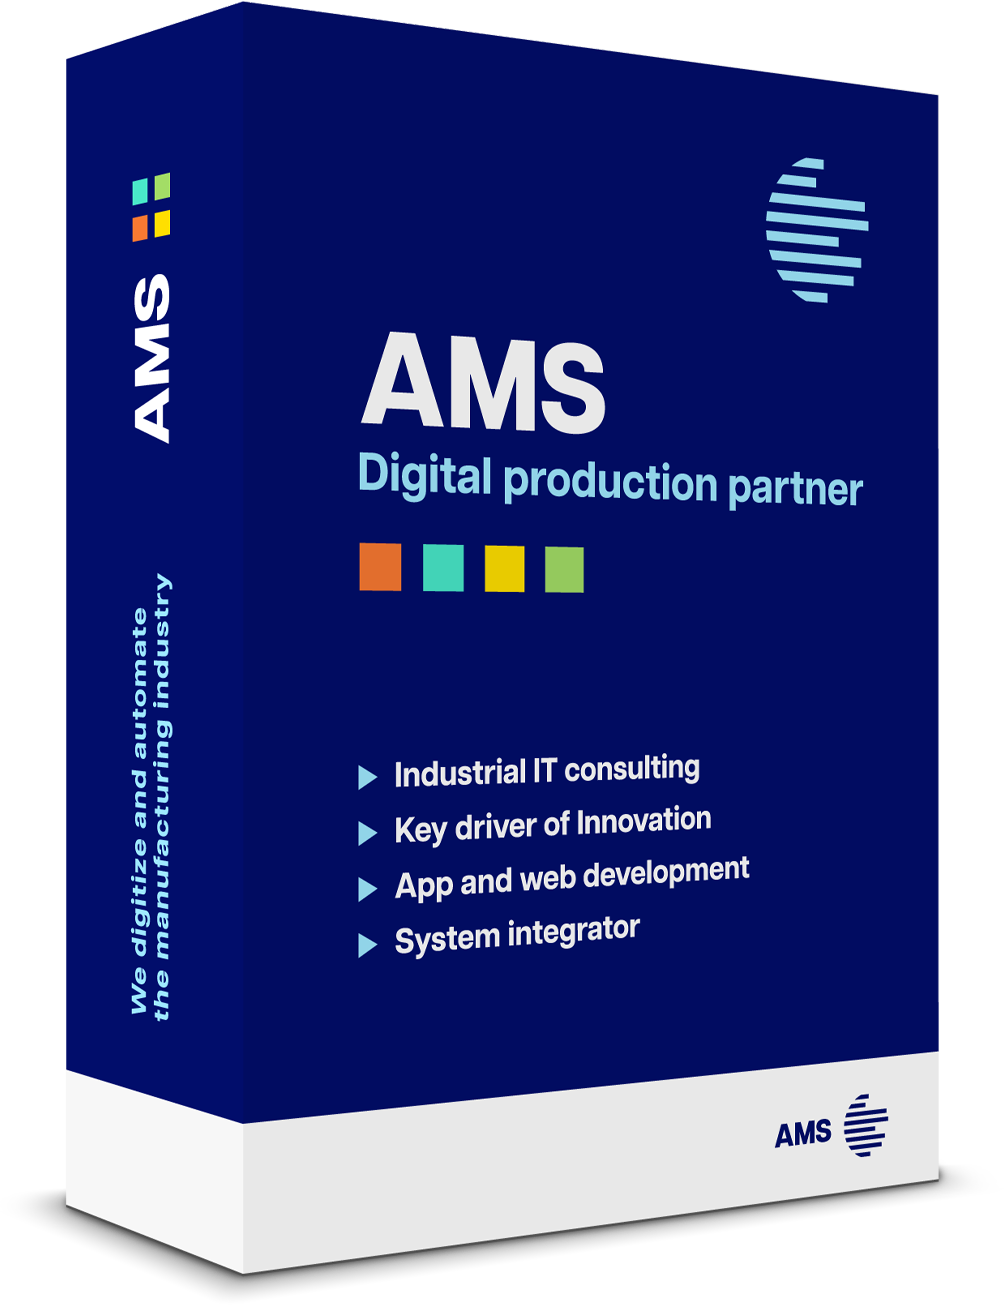 AMS - Your Digital Production Partner and Innovation Driver